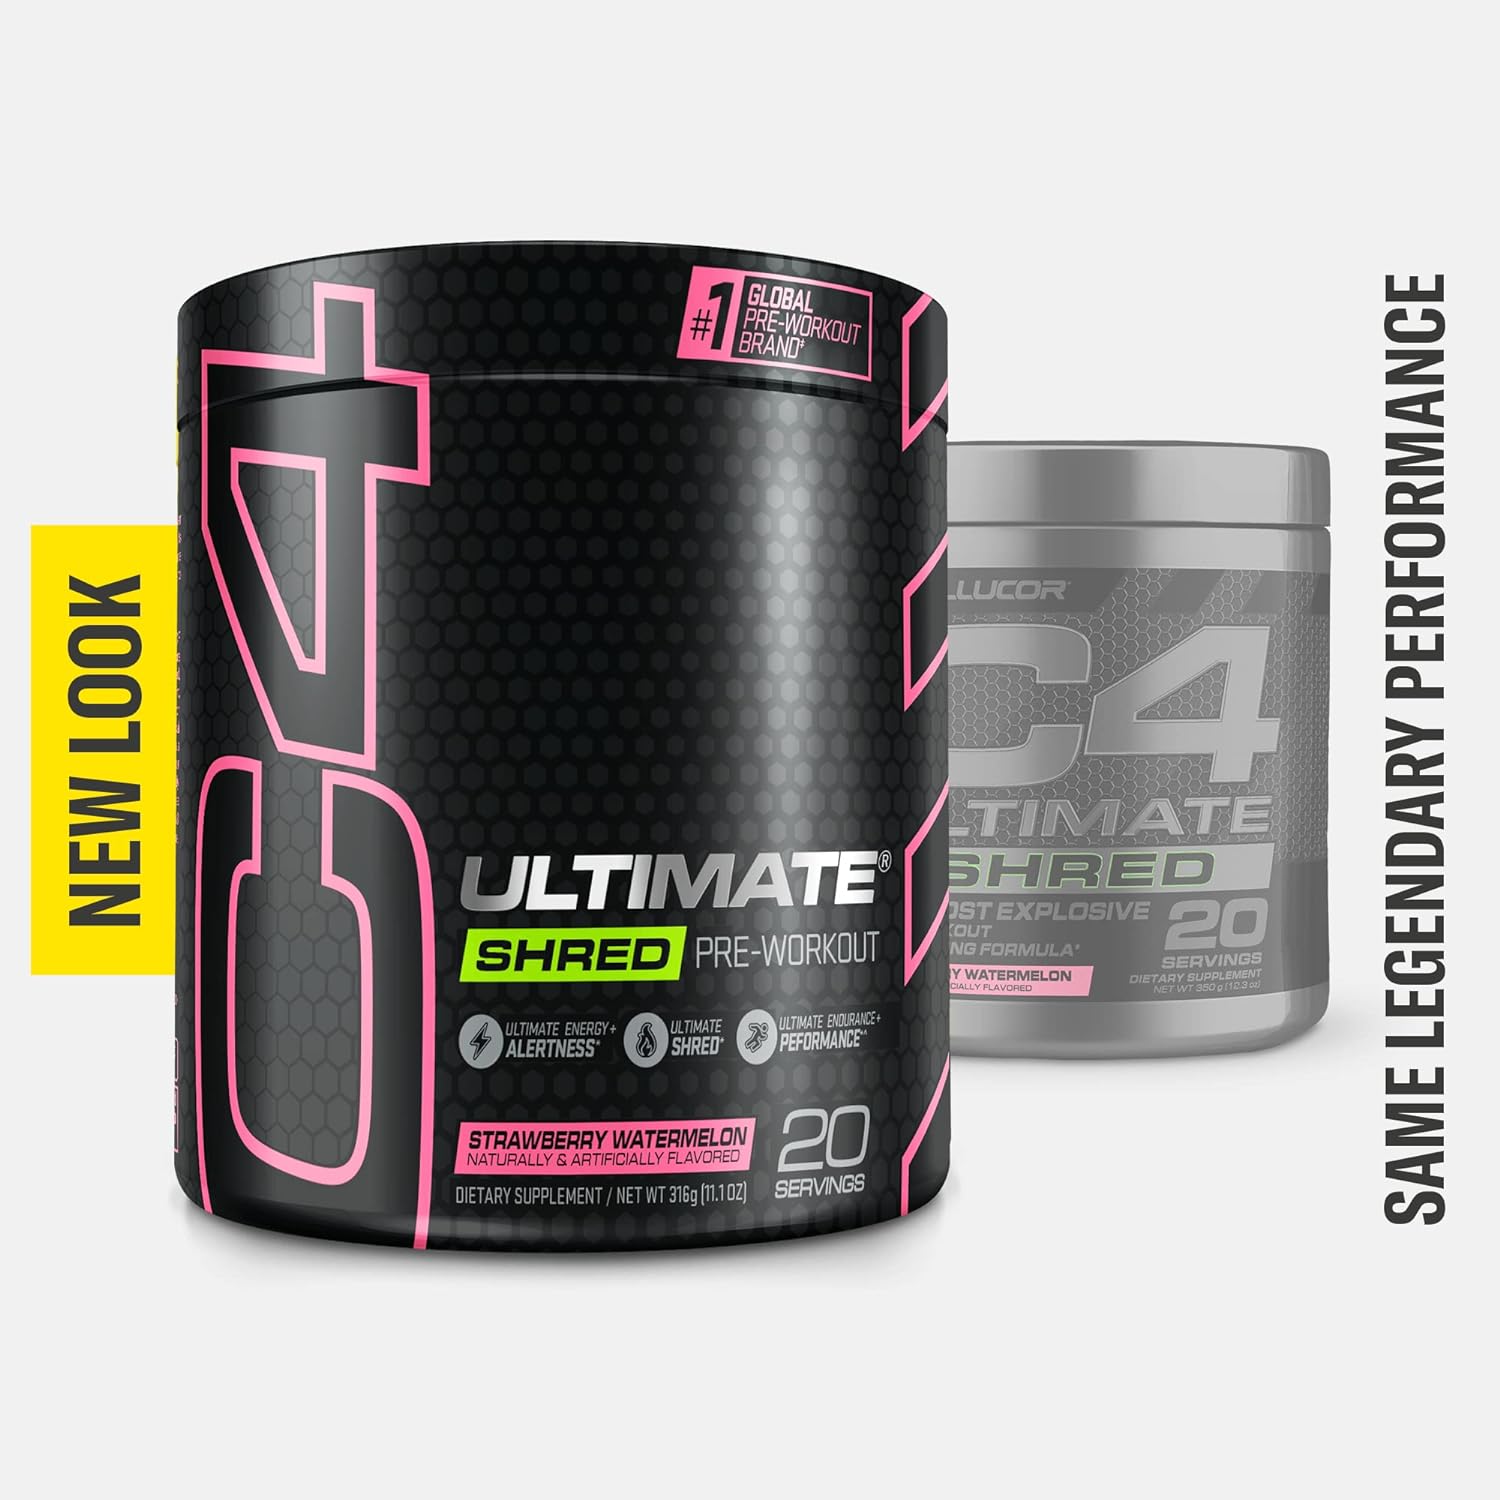 Cellucor C4 Ultimate Shred Pre Workout Powder for Men & Women, Weight Loss Supplement with Ginger Root Extract, Strawberry Watermelon, 20 Servings (Pack of 1) : Health & Household